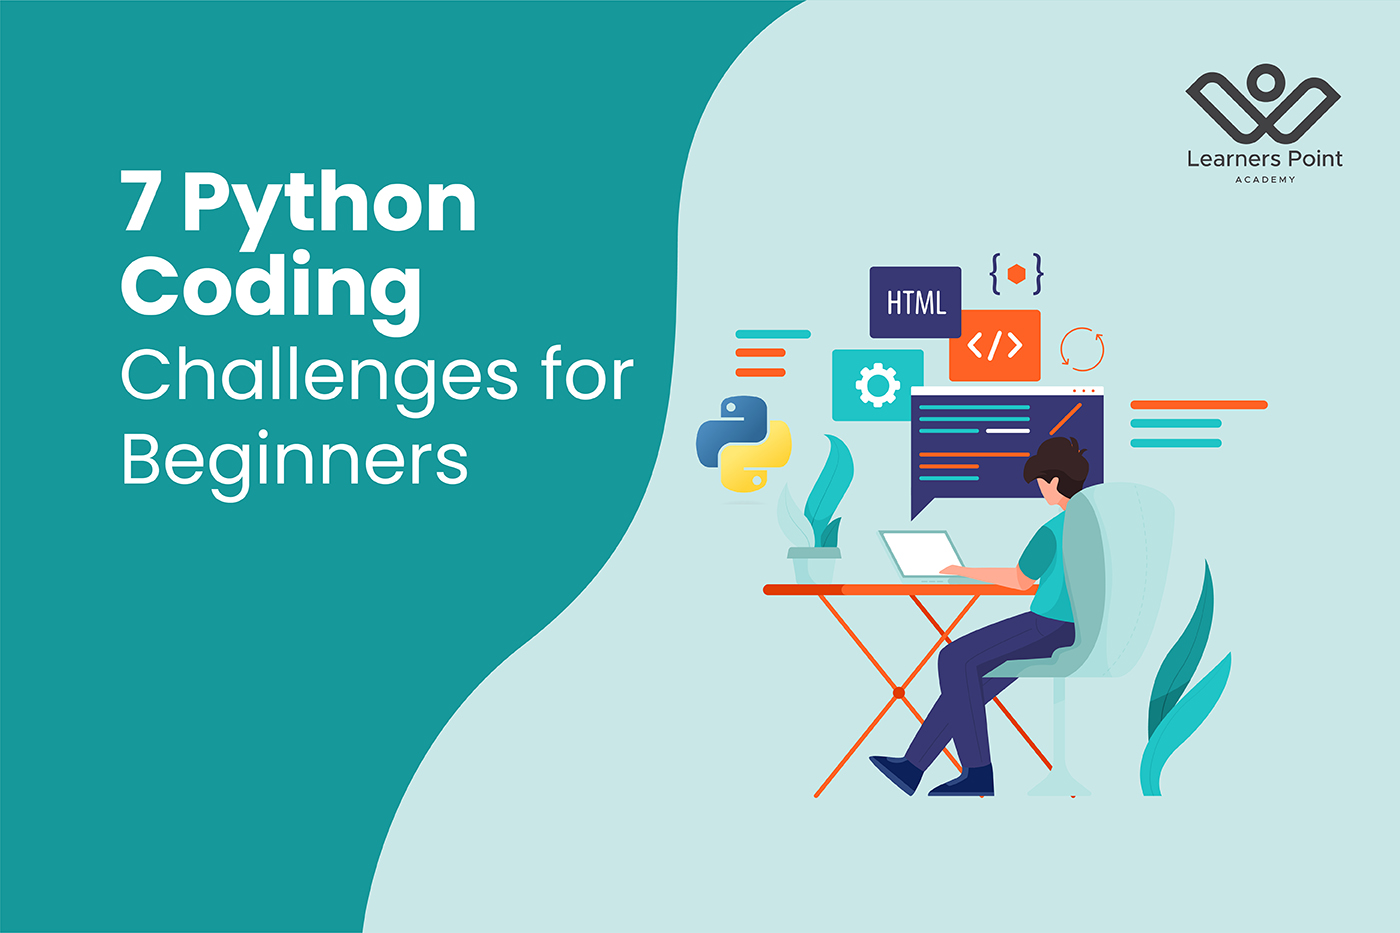 7 Python Coding Challenges for Beginners